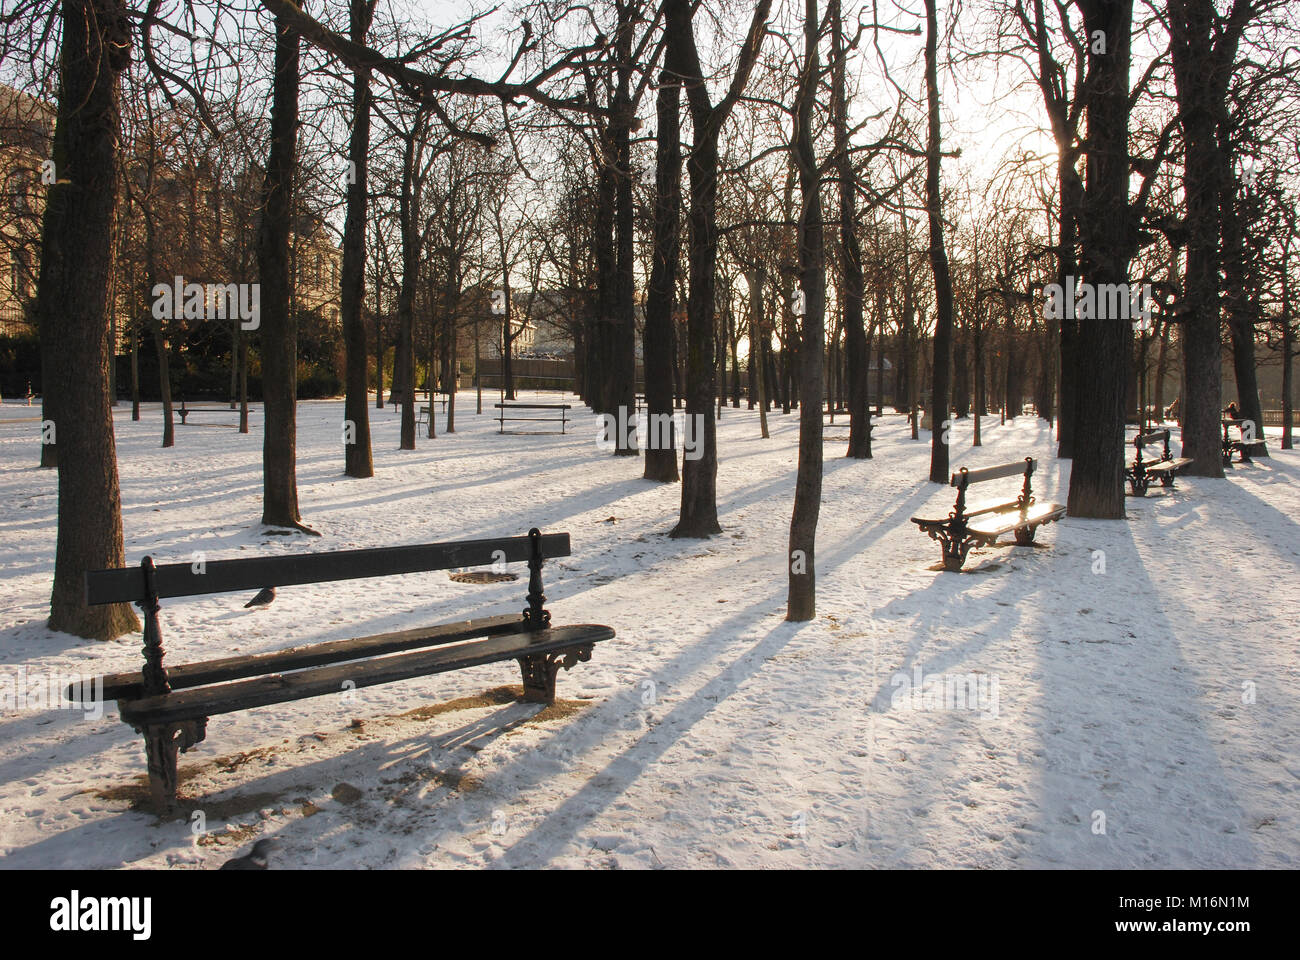 Snow Scene in Paris Park with Park Benches Stock Photo